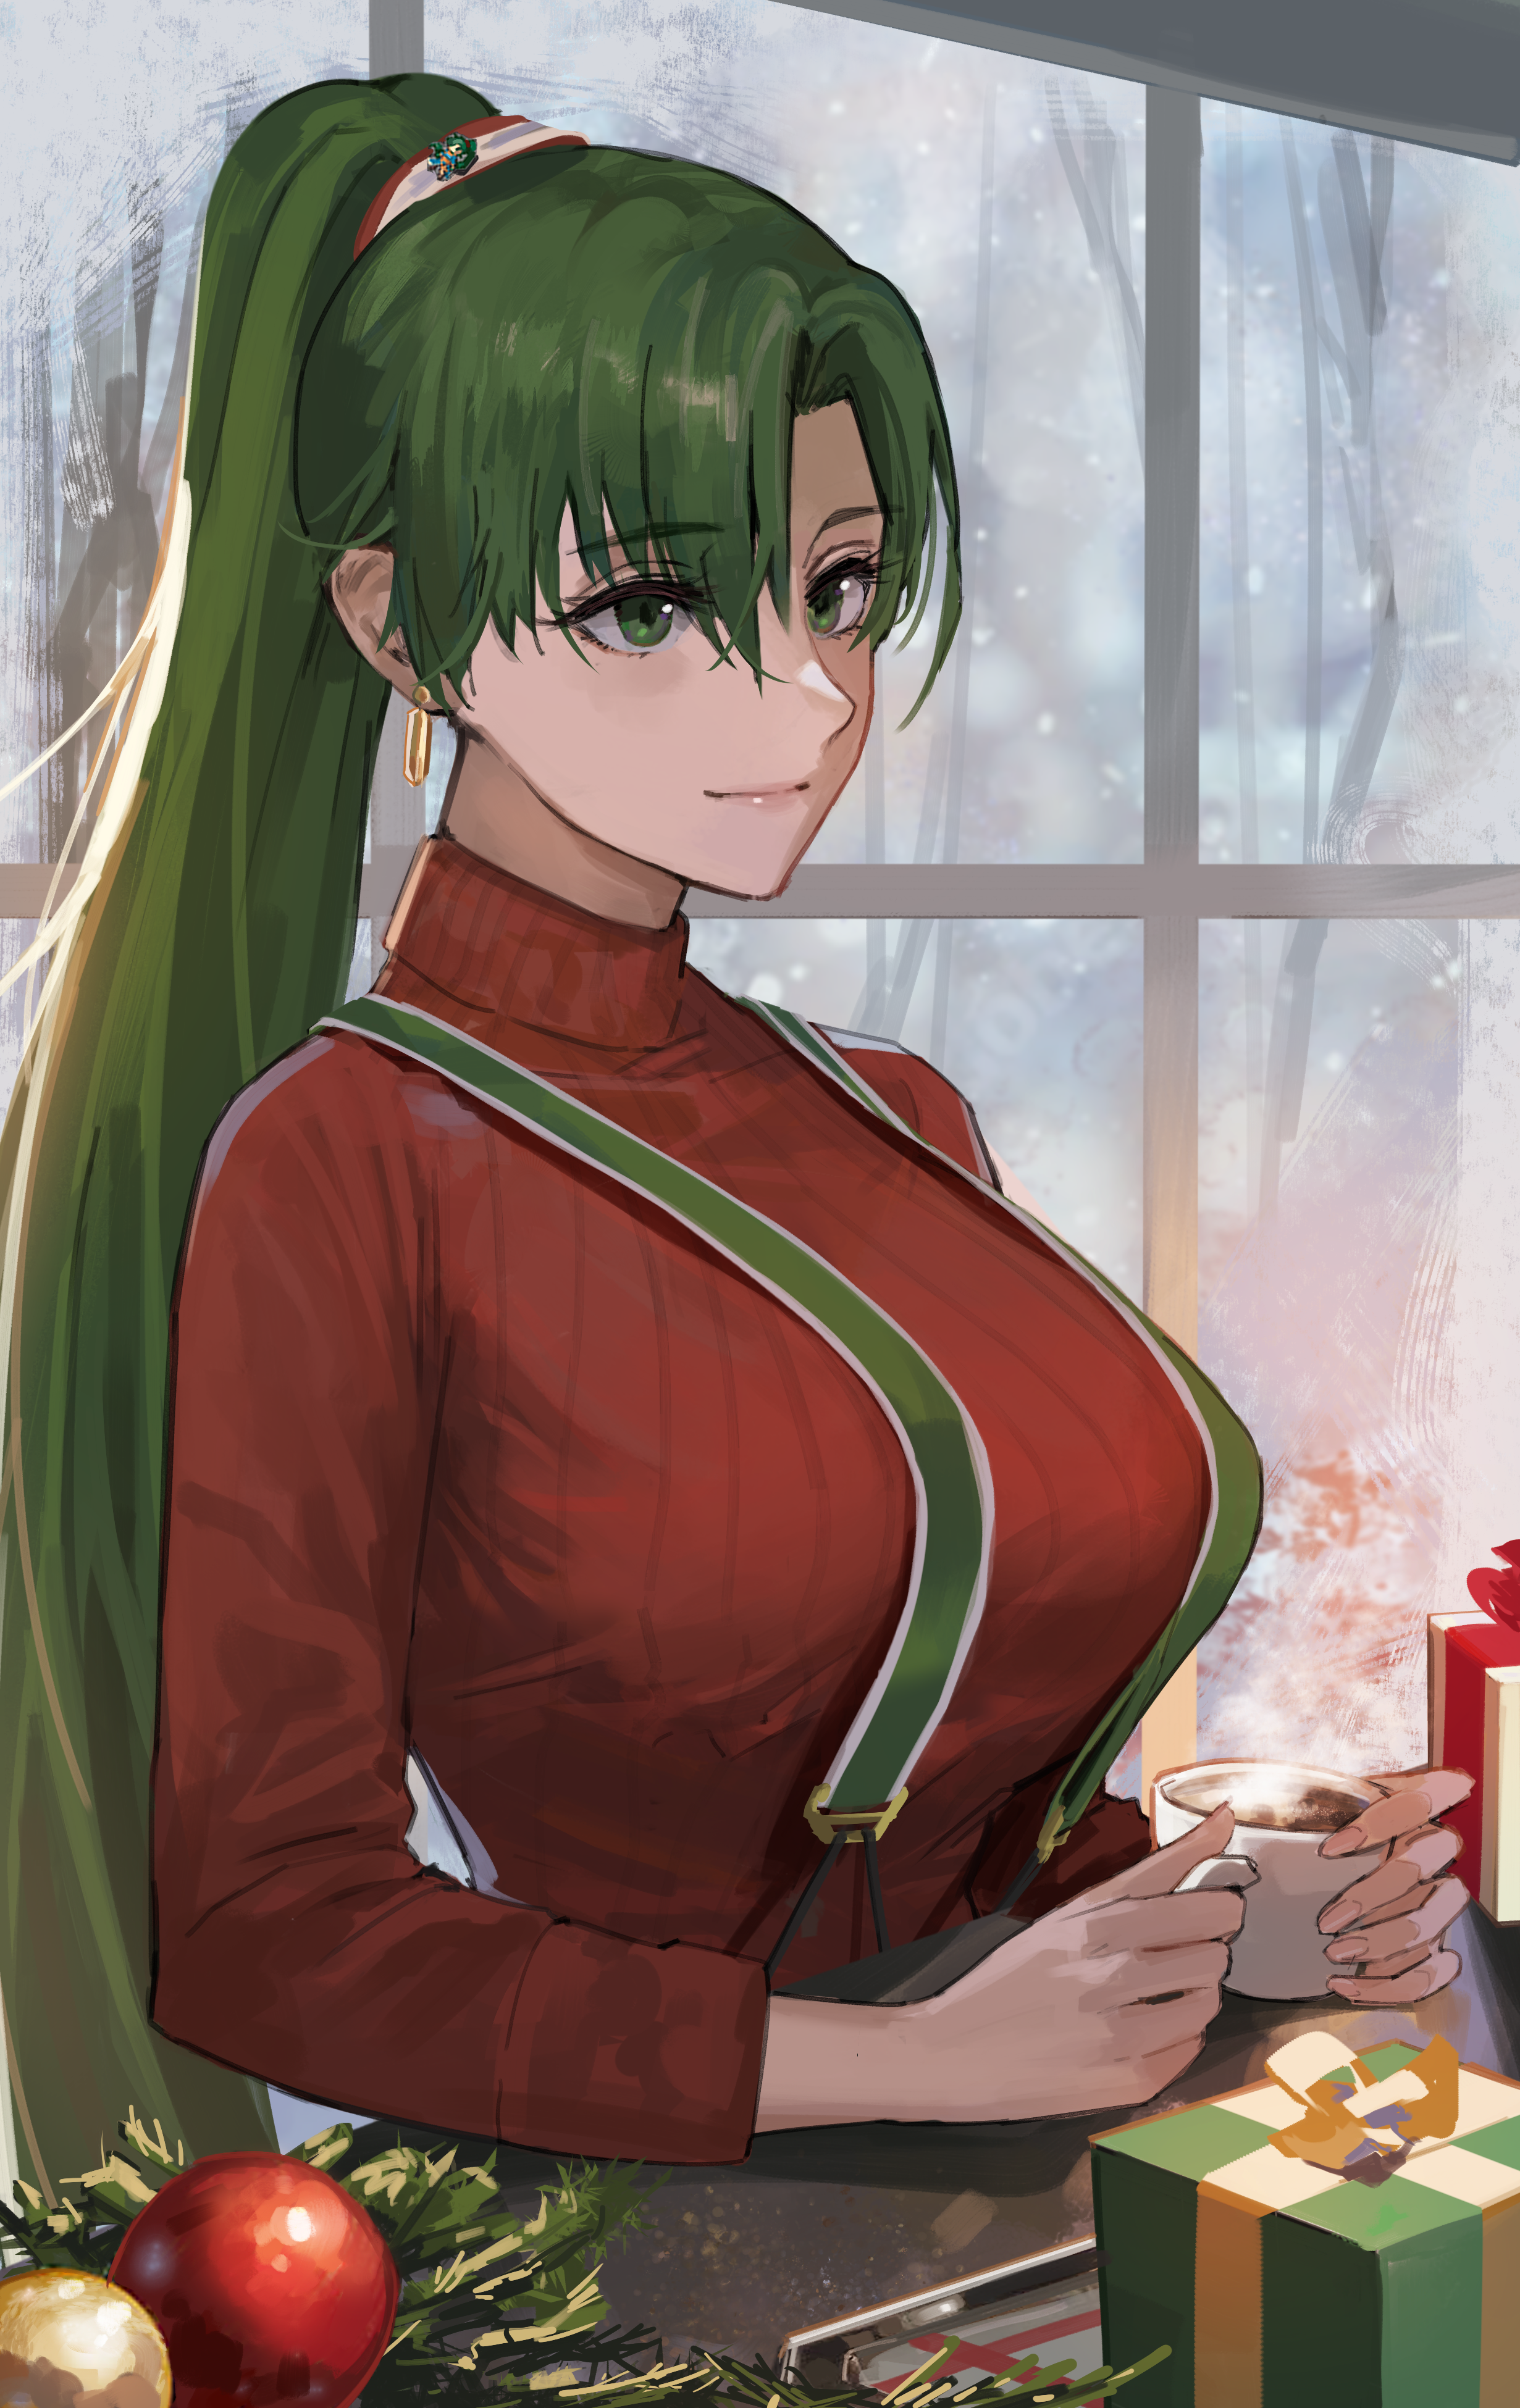 Lyn Fire Emblem Fire Emblem Video Games Video Game Characters Anime Anime Girls Green Hair Ponytail  2461x3900